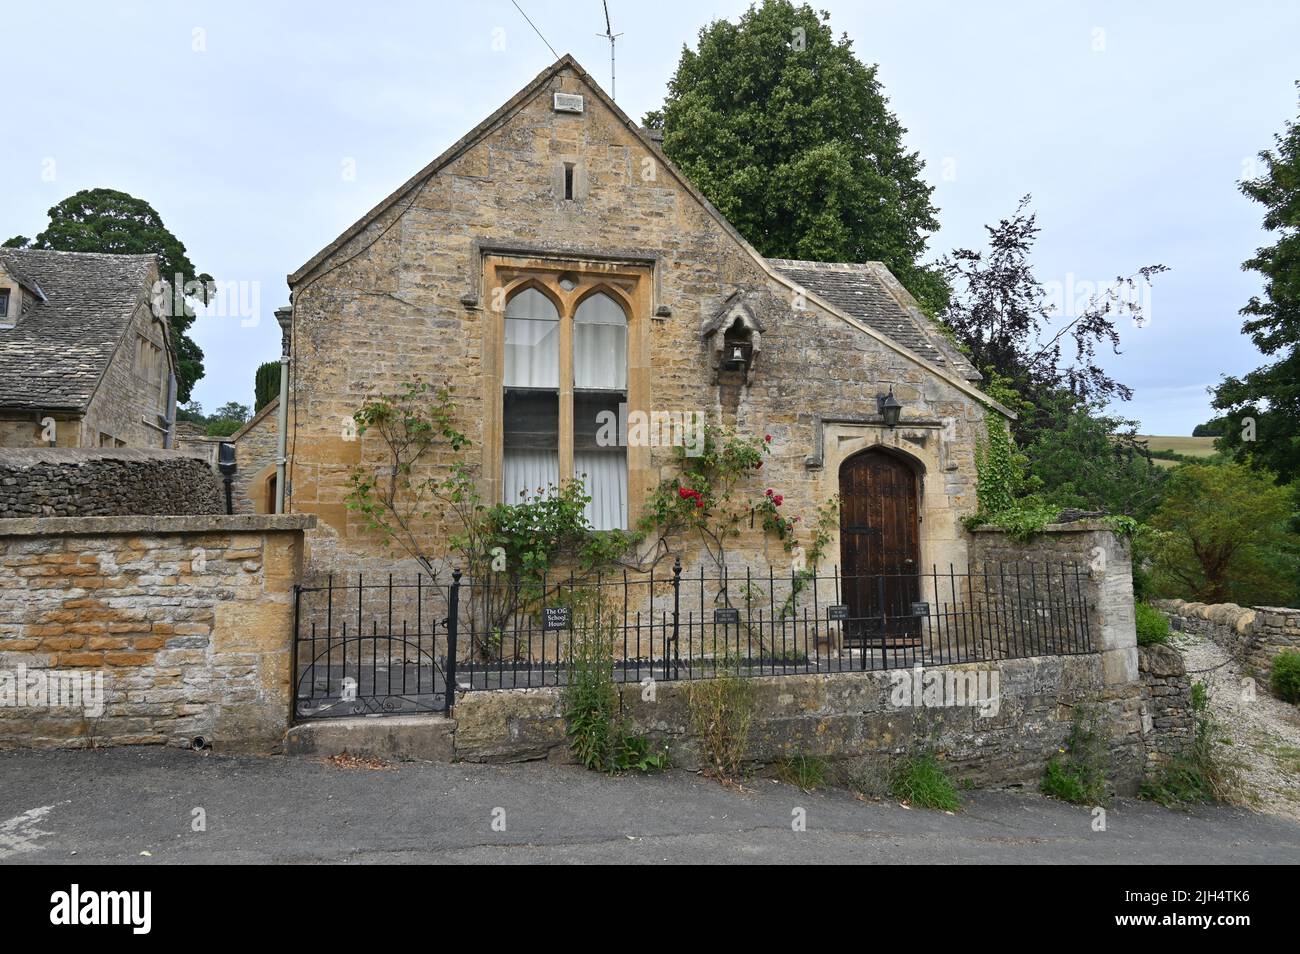 The Old School House, a traditional stone built house in the Gloucestershire village of Upper Slaughter Stock Photo